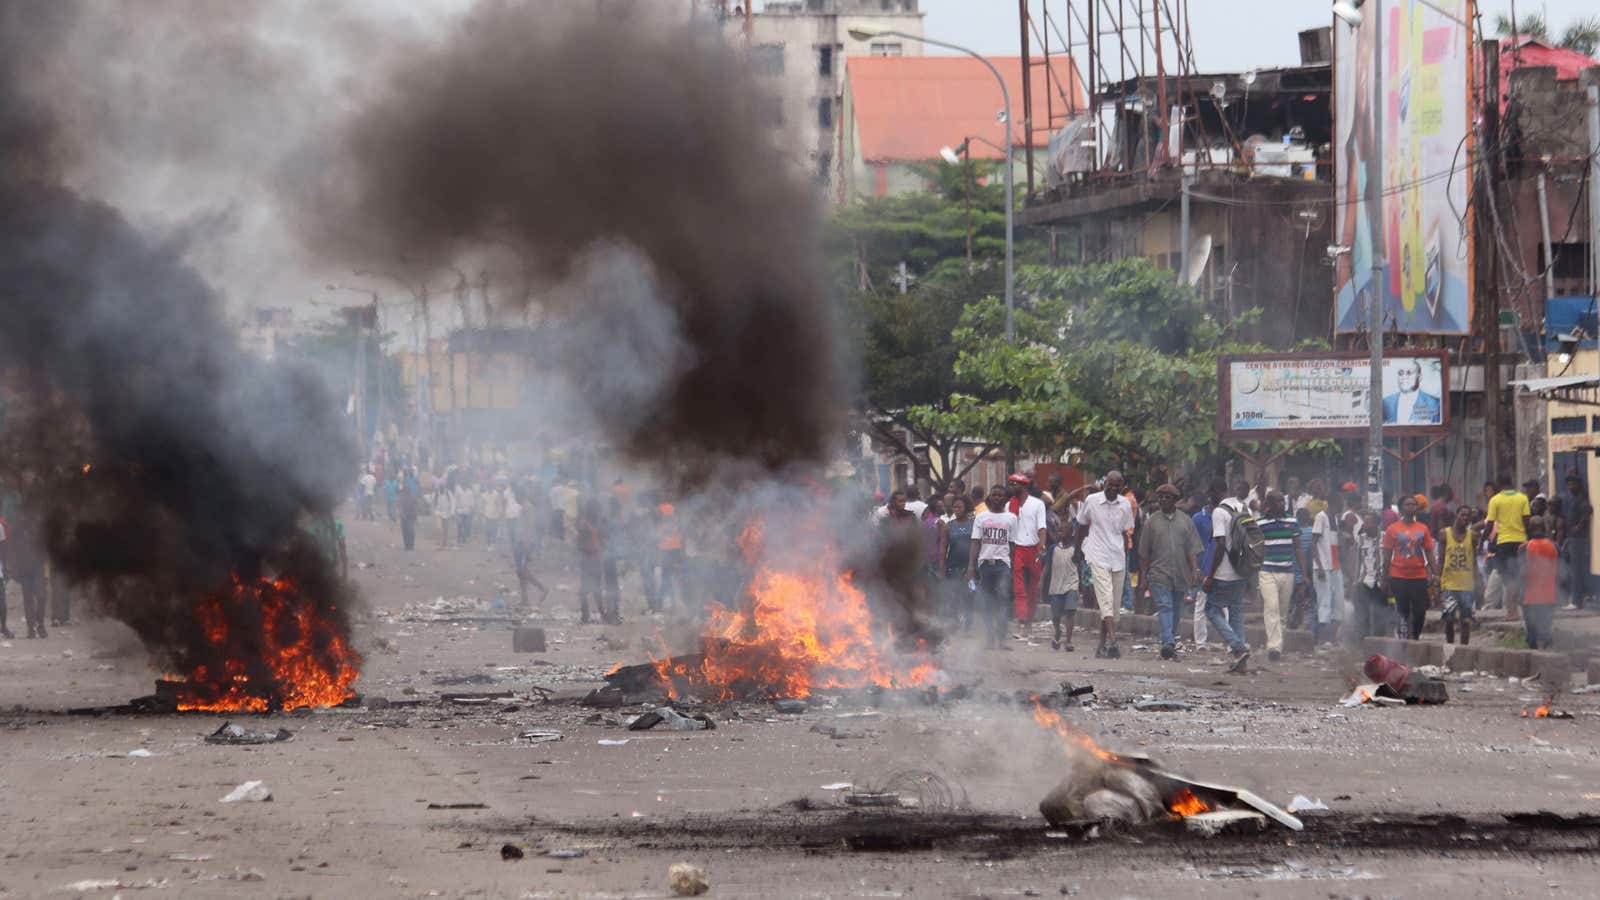 Kinshasa is gripped by violence, yet again.